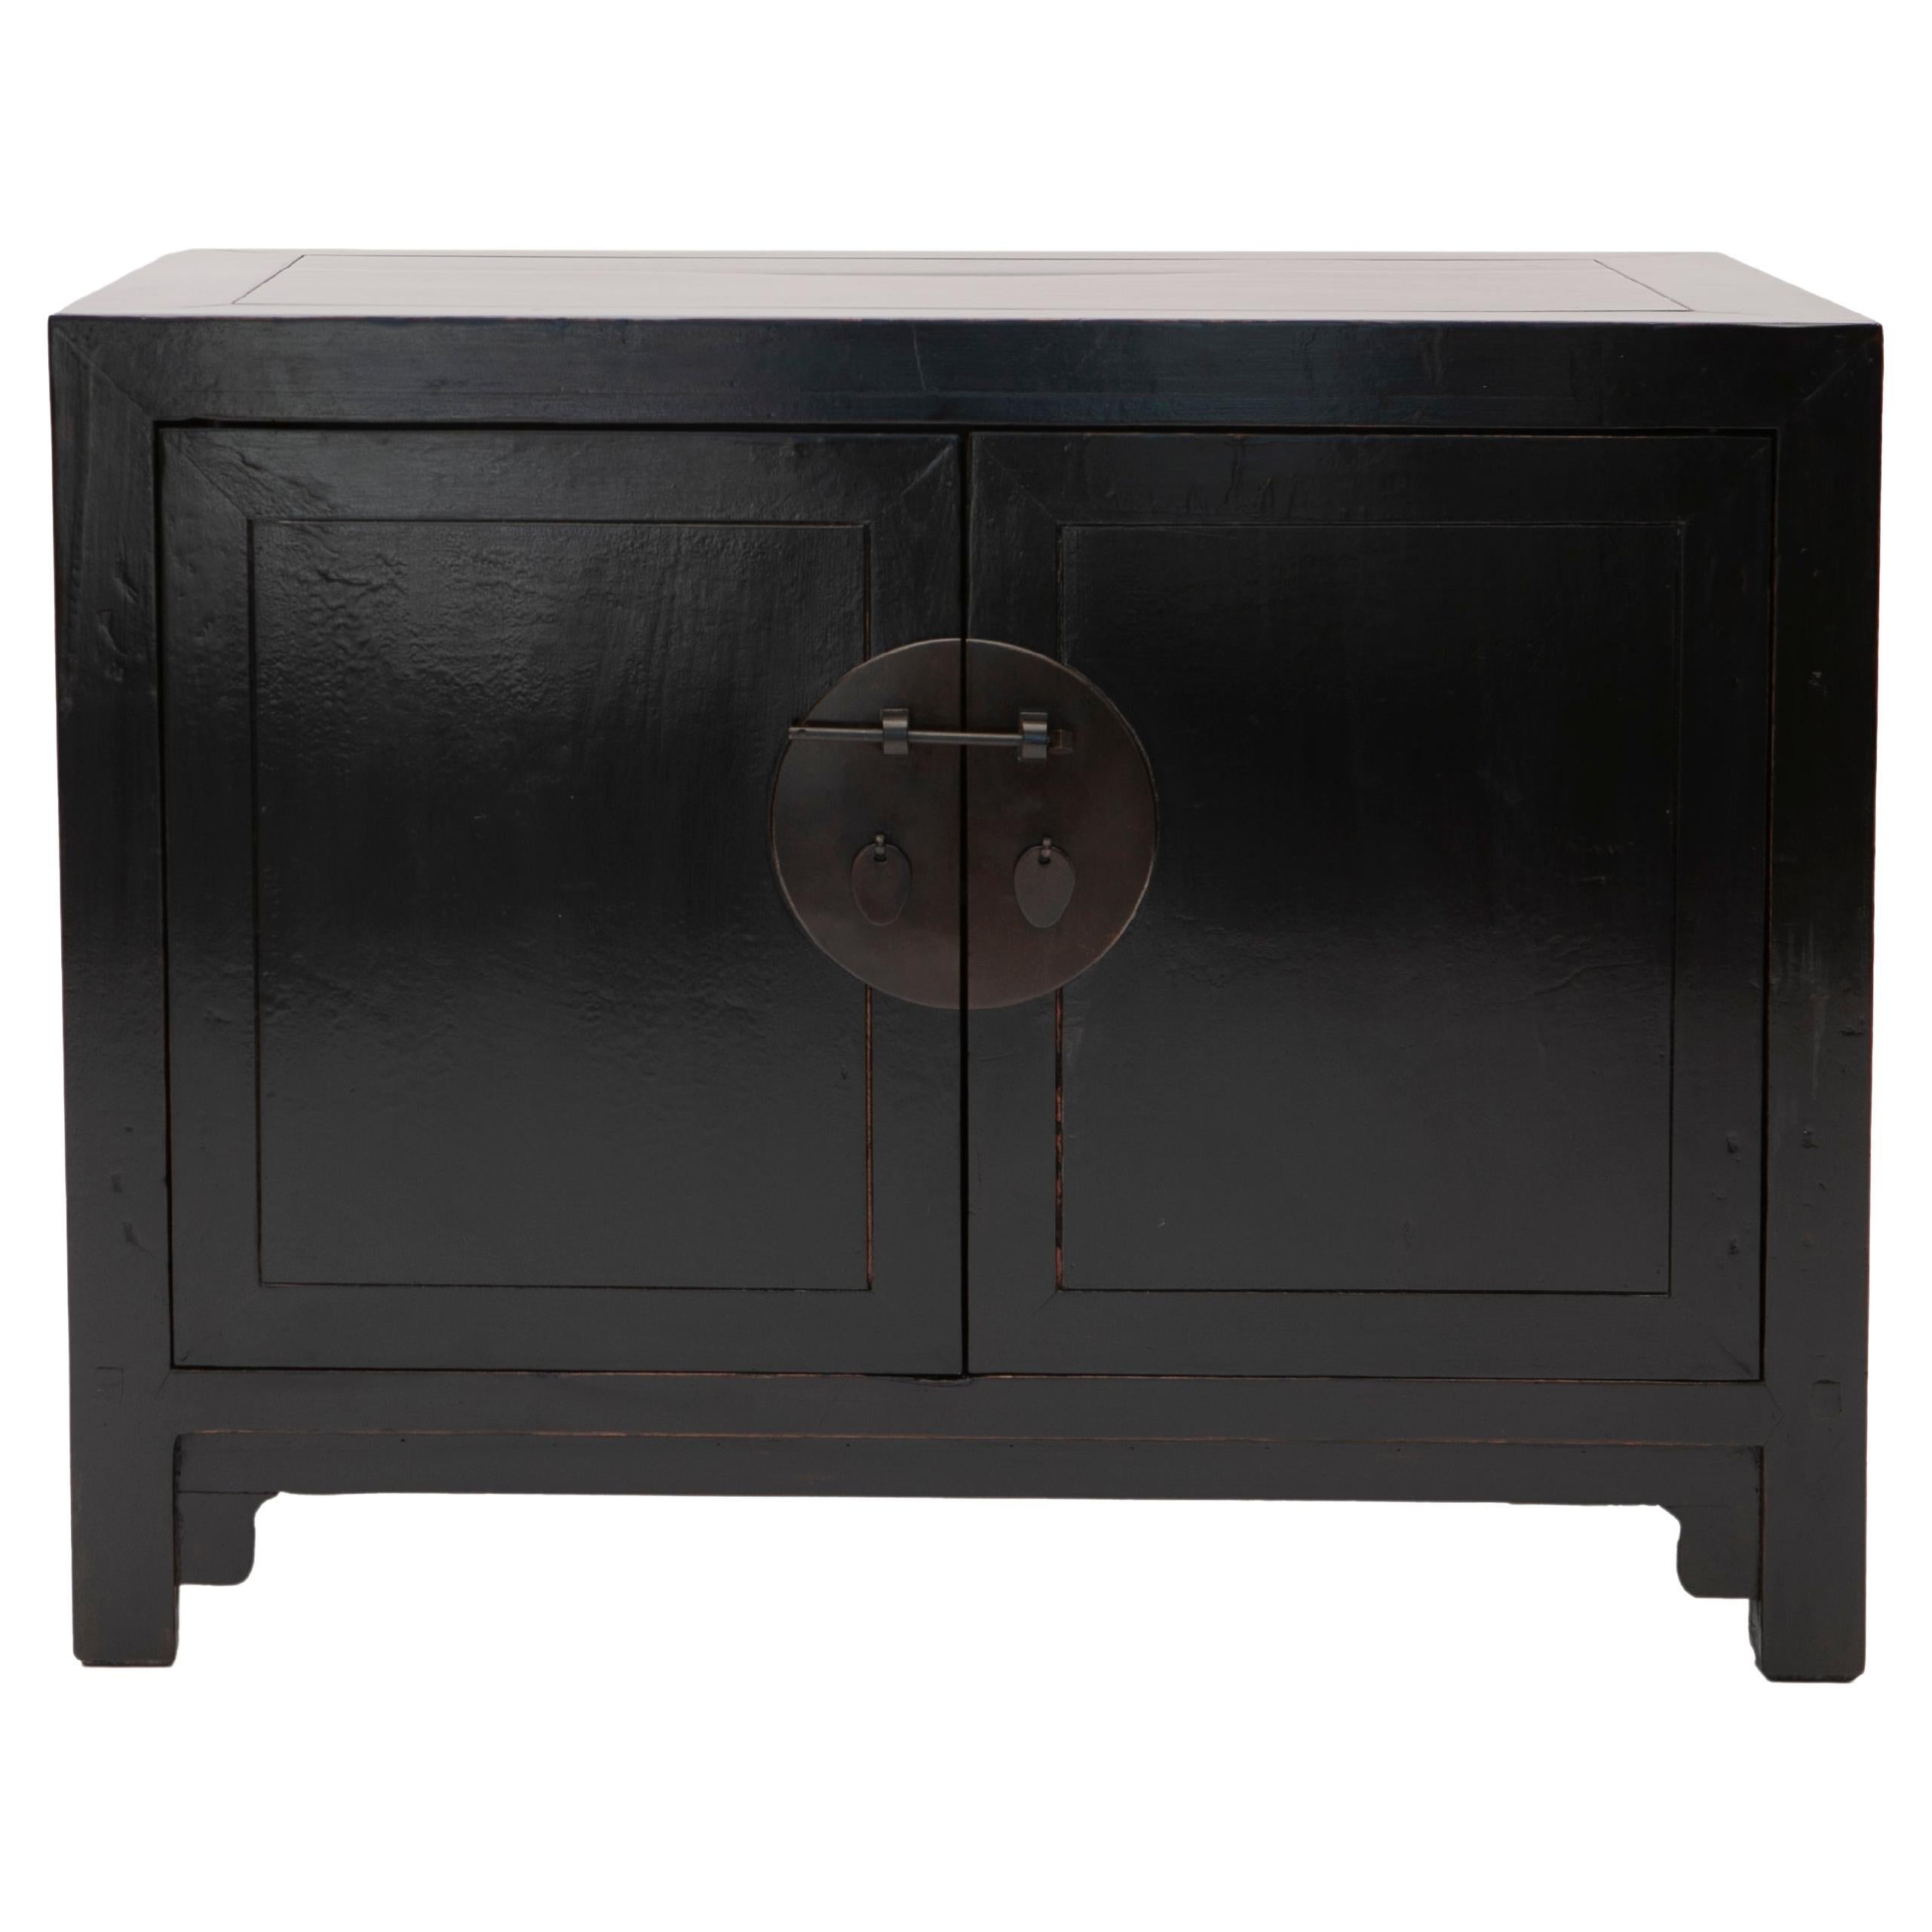 Black Lacquer Art Deco Lower Cabinet / Sideboard